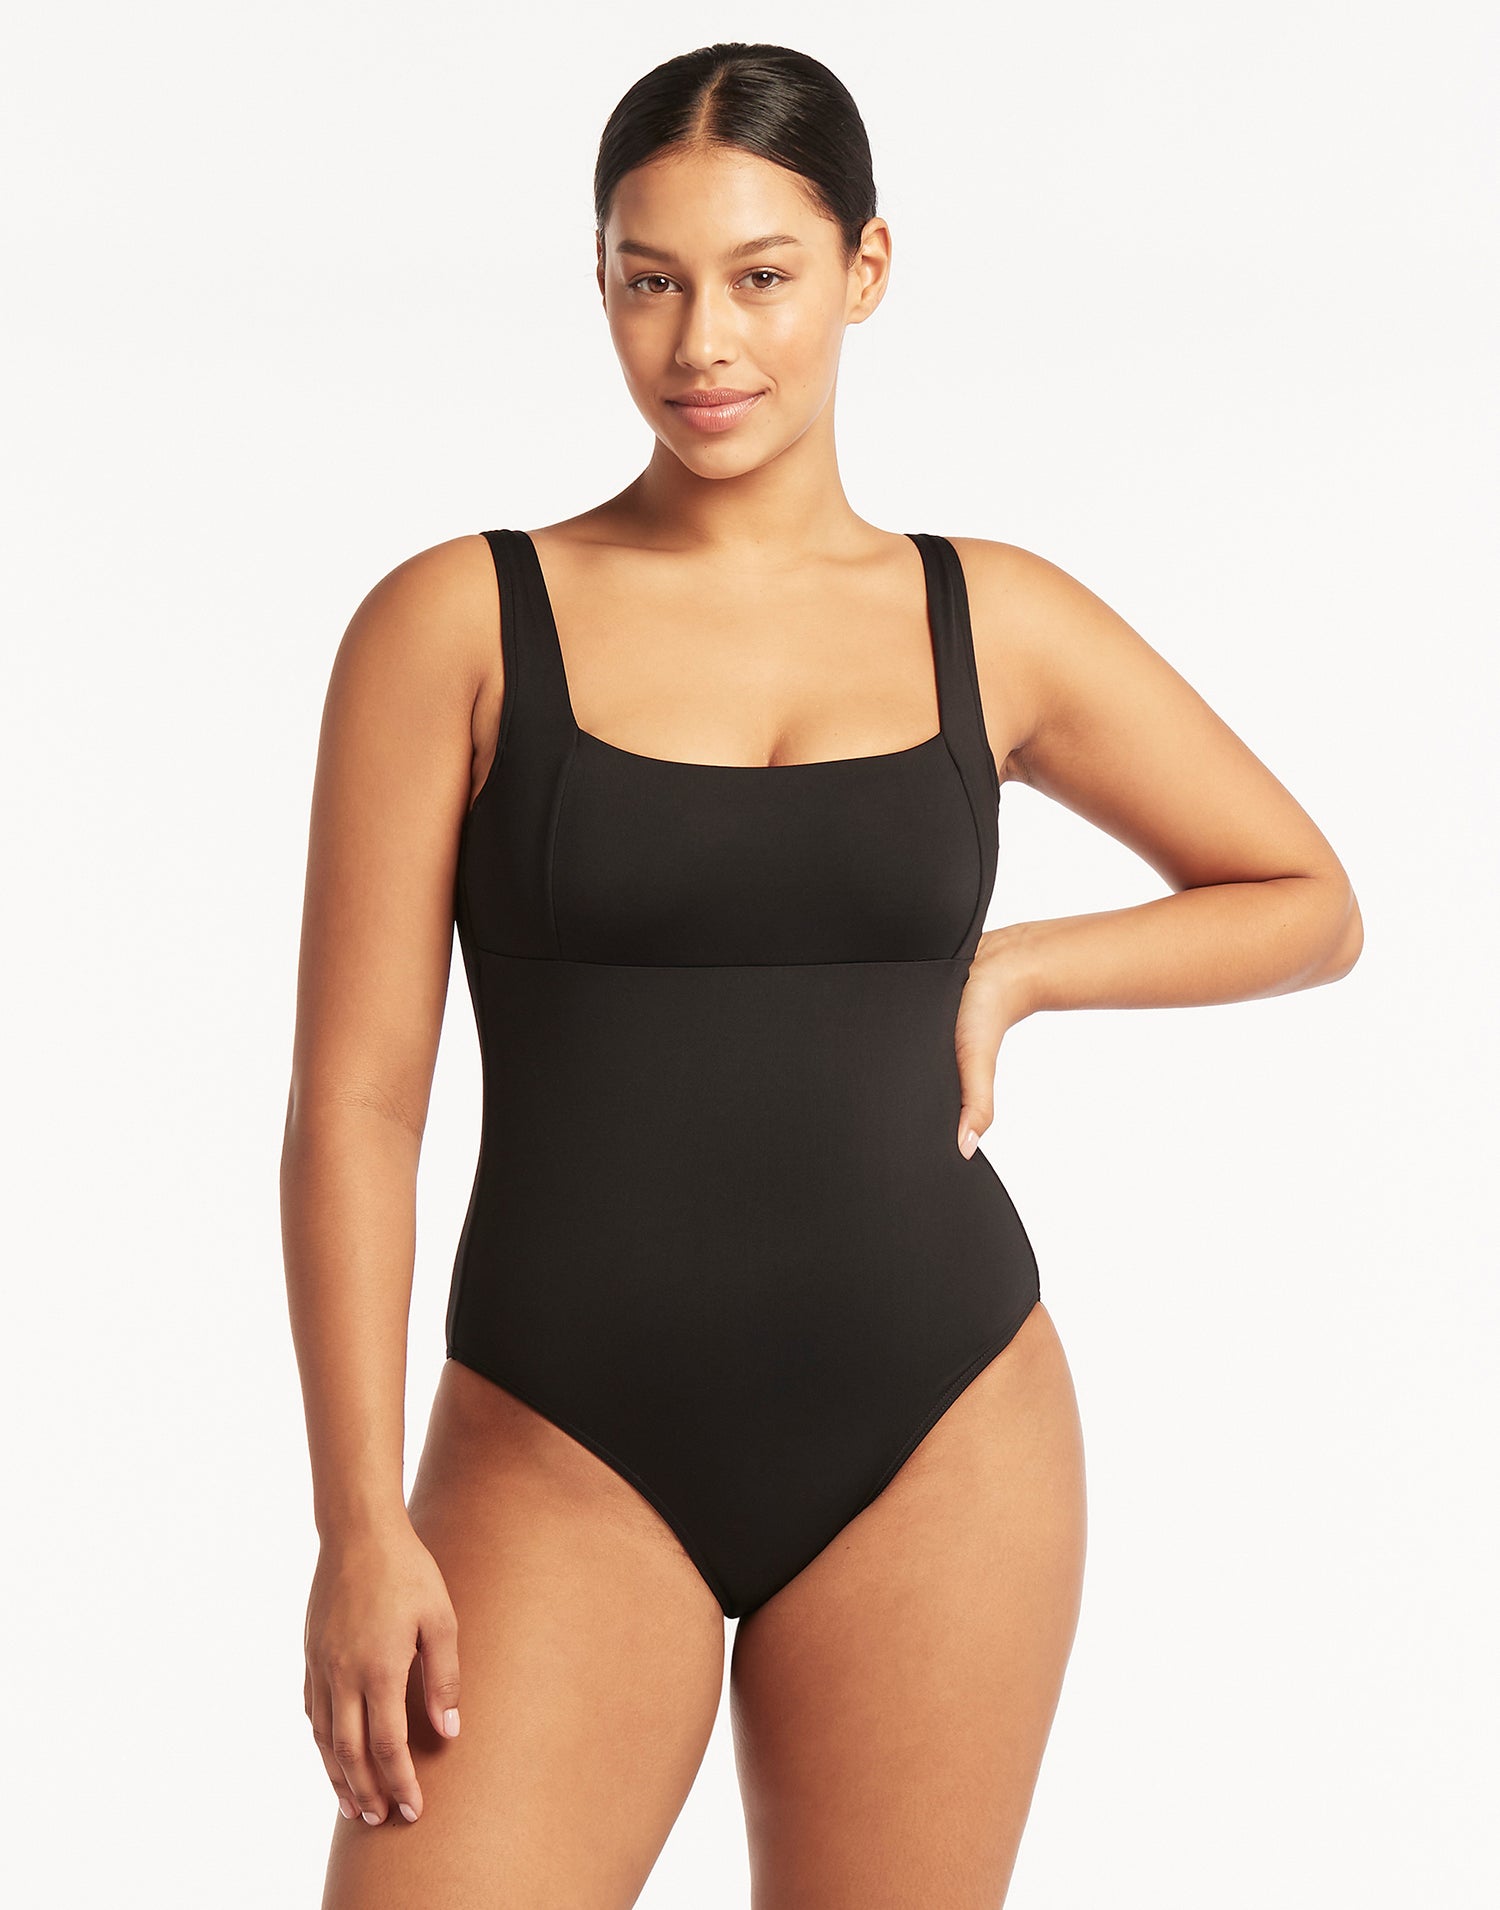 Essentials Square Neck One Piece by Sea Level in Black - Front View